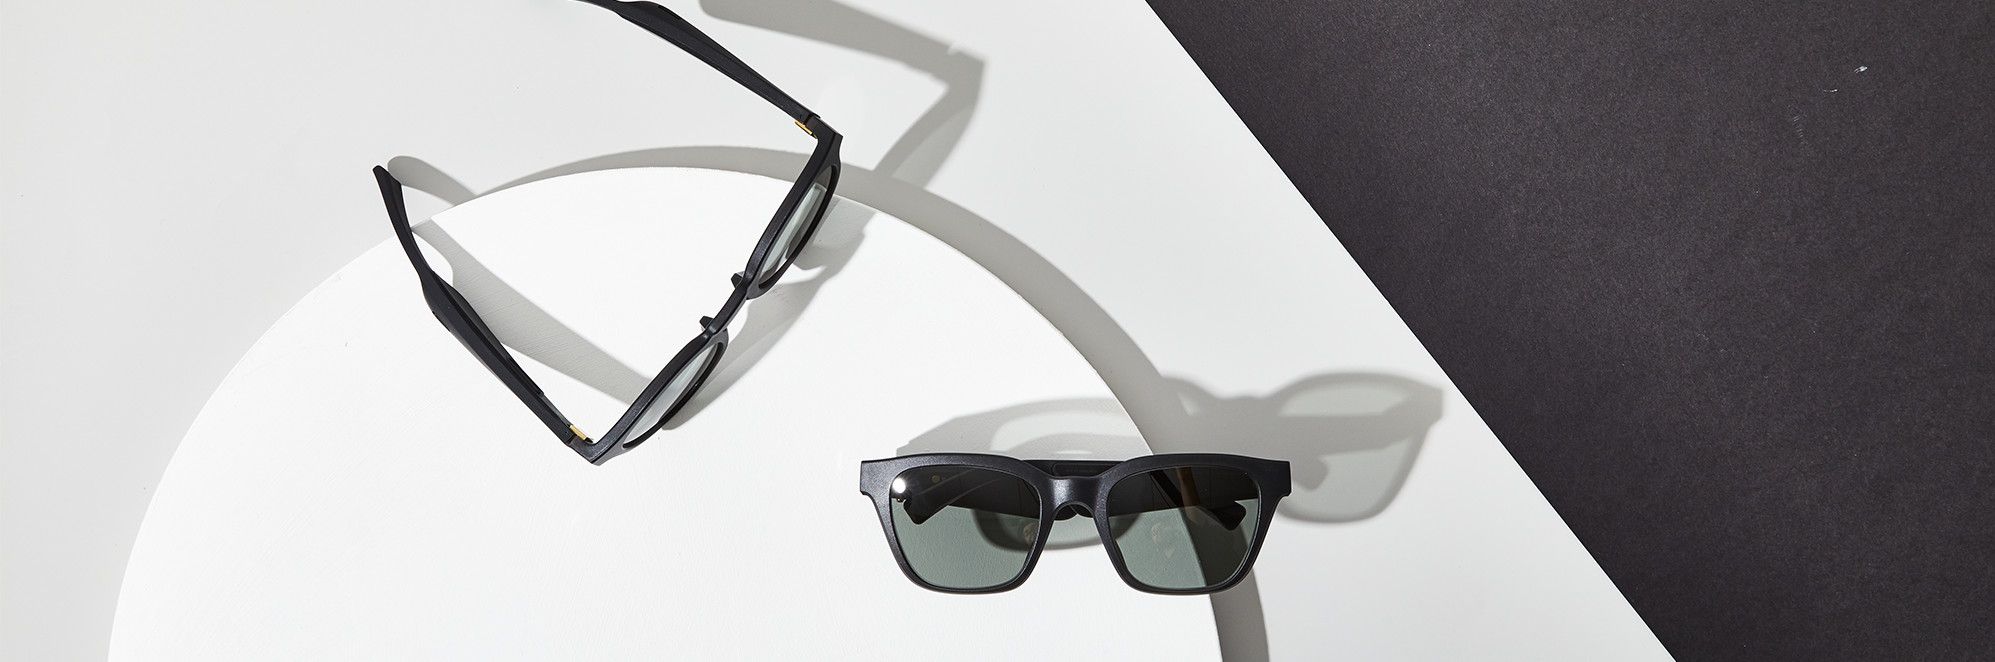 Bose Frames Combine Wireless Audio with Sunglasses for Convenient